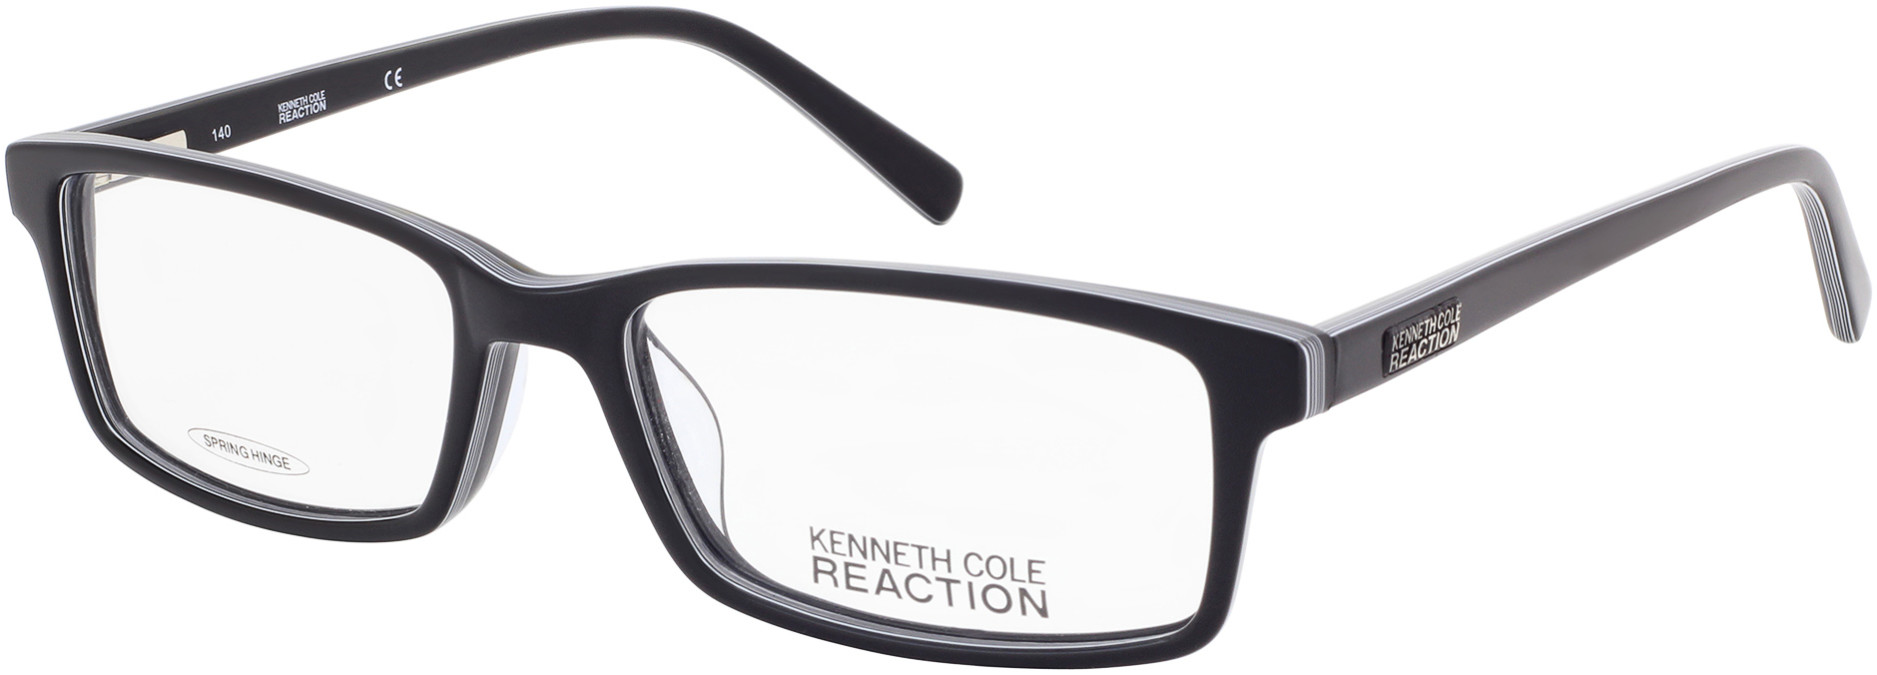 KENNETH COLE NY 0749